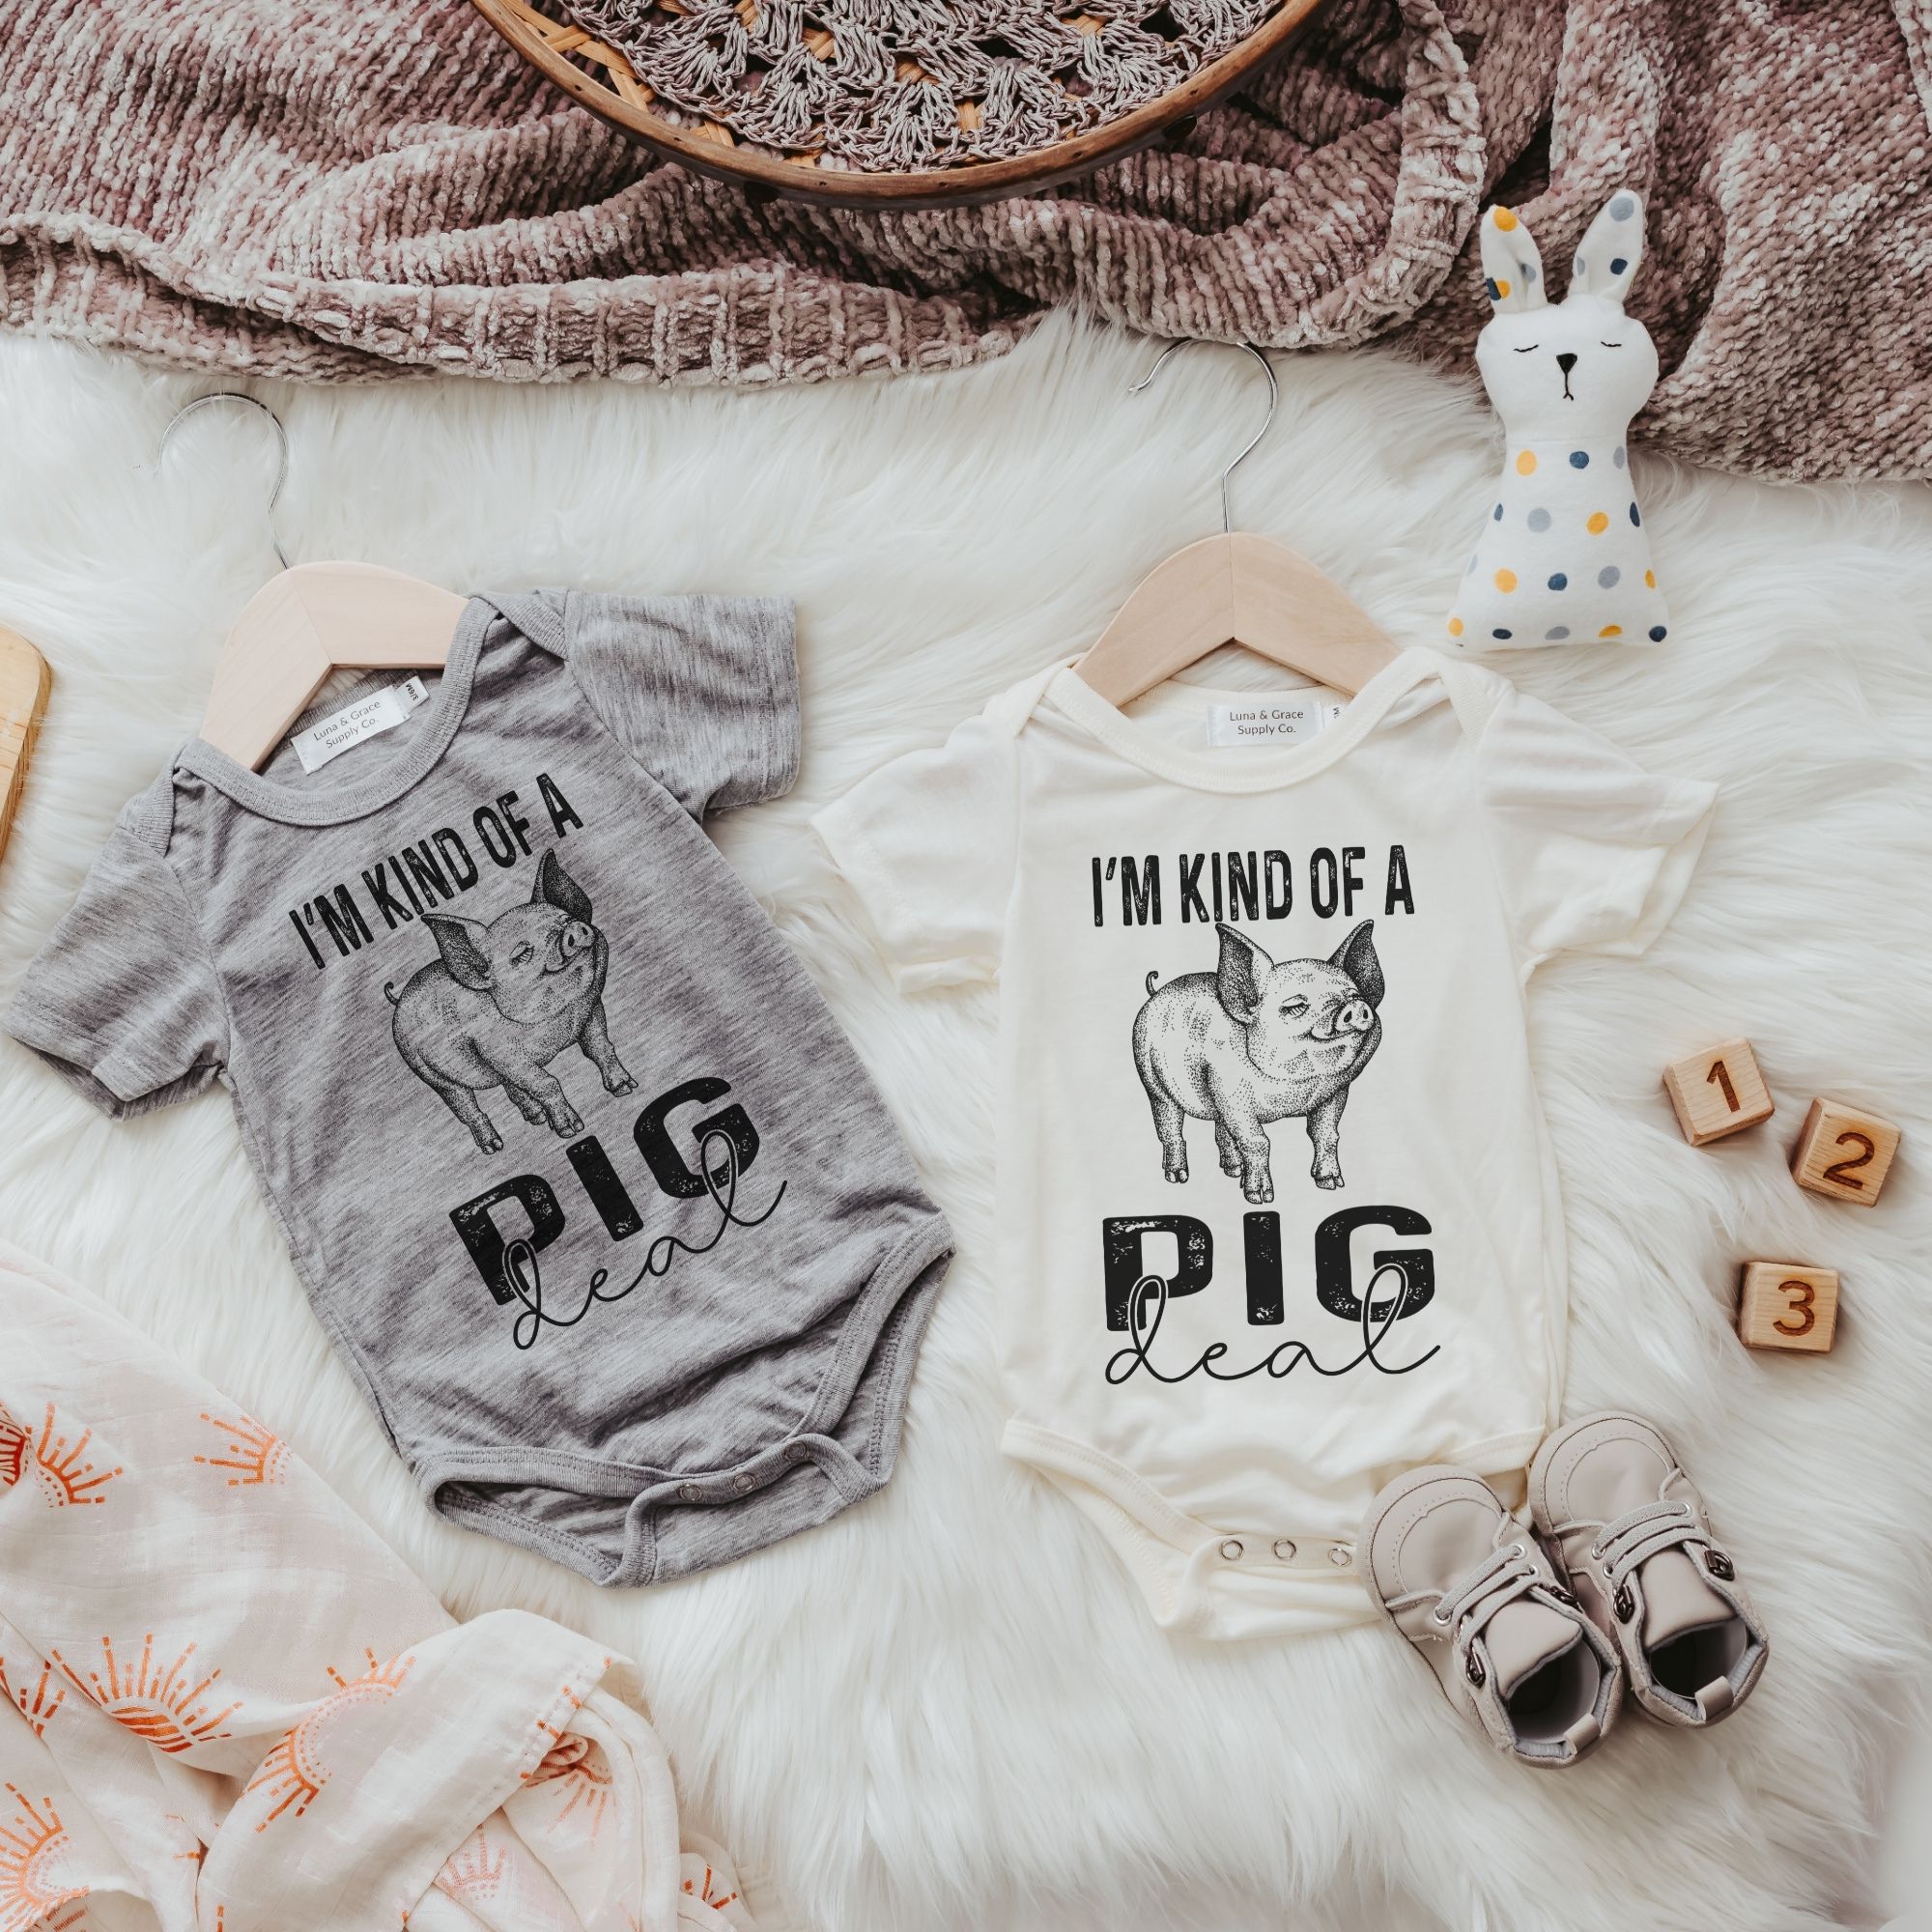 I'm kind of a pig deal outfit for baby